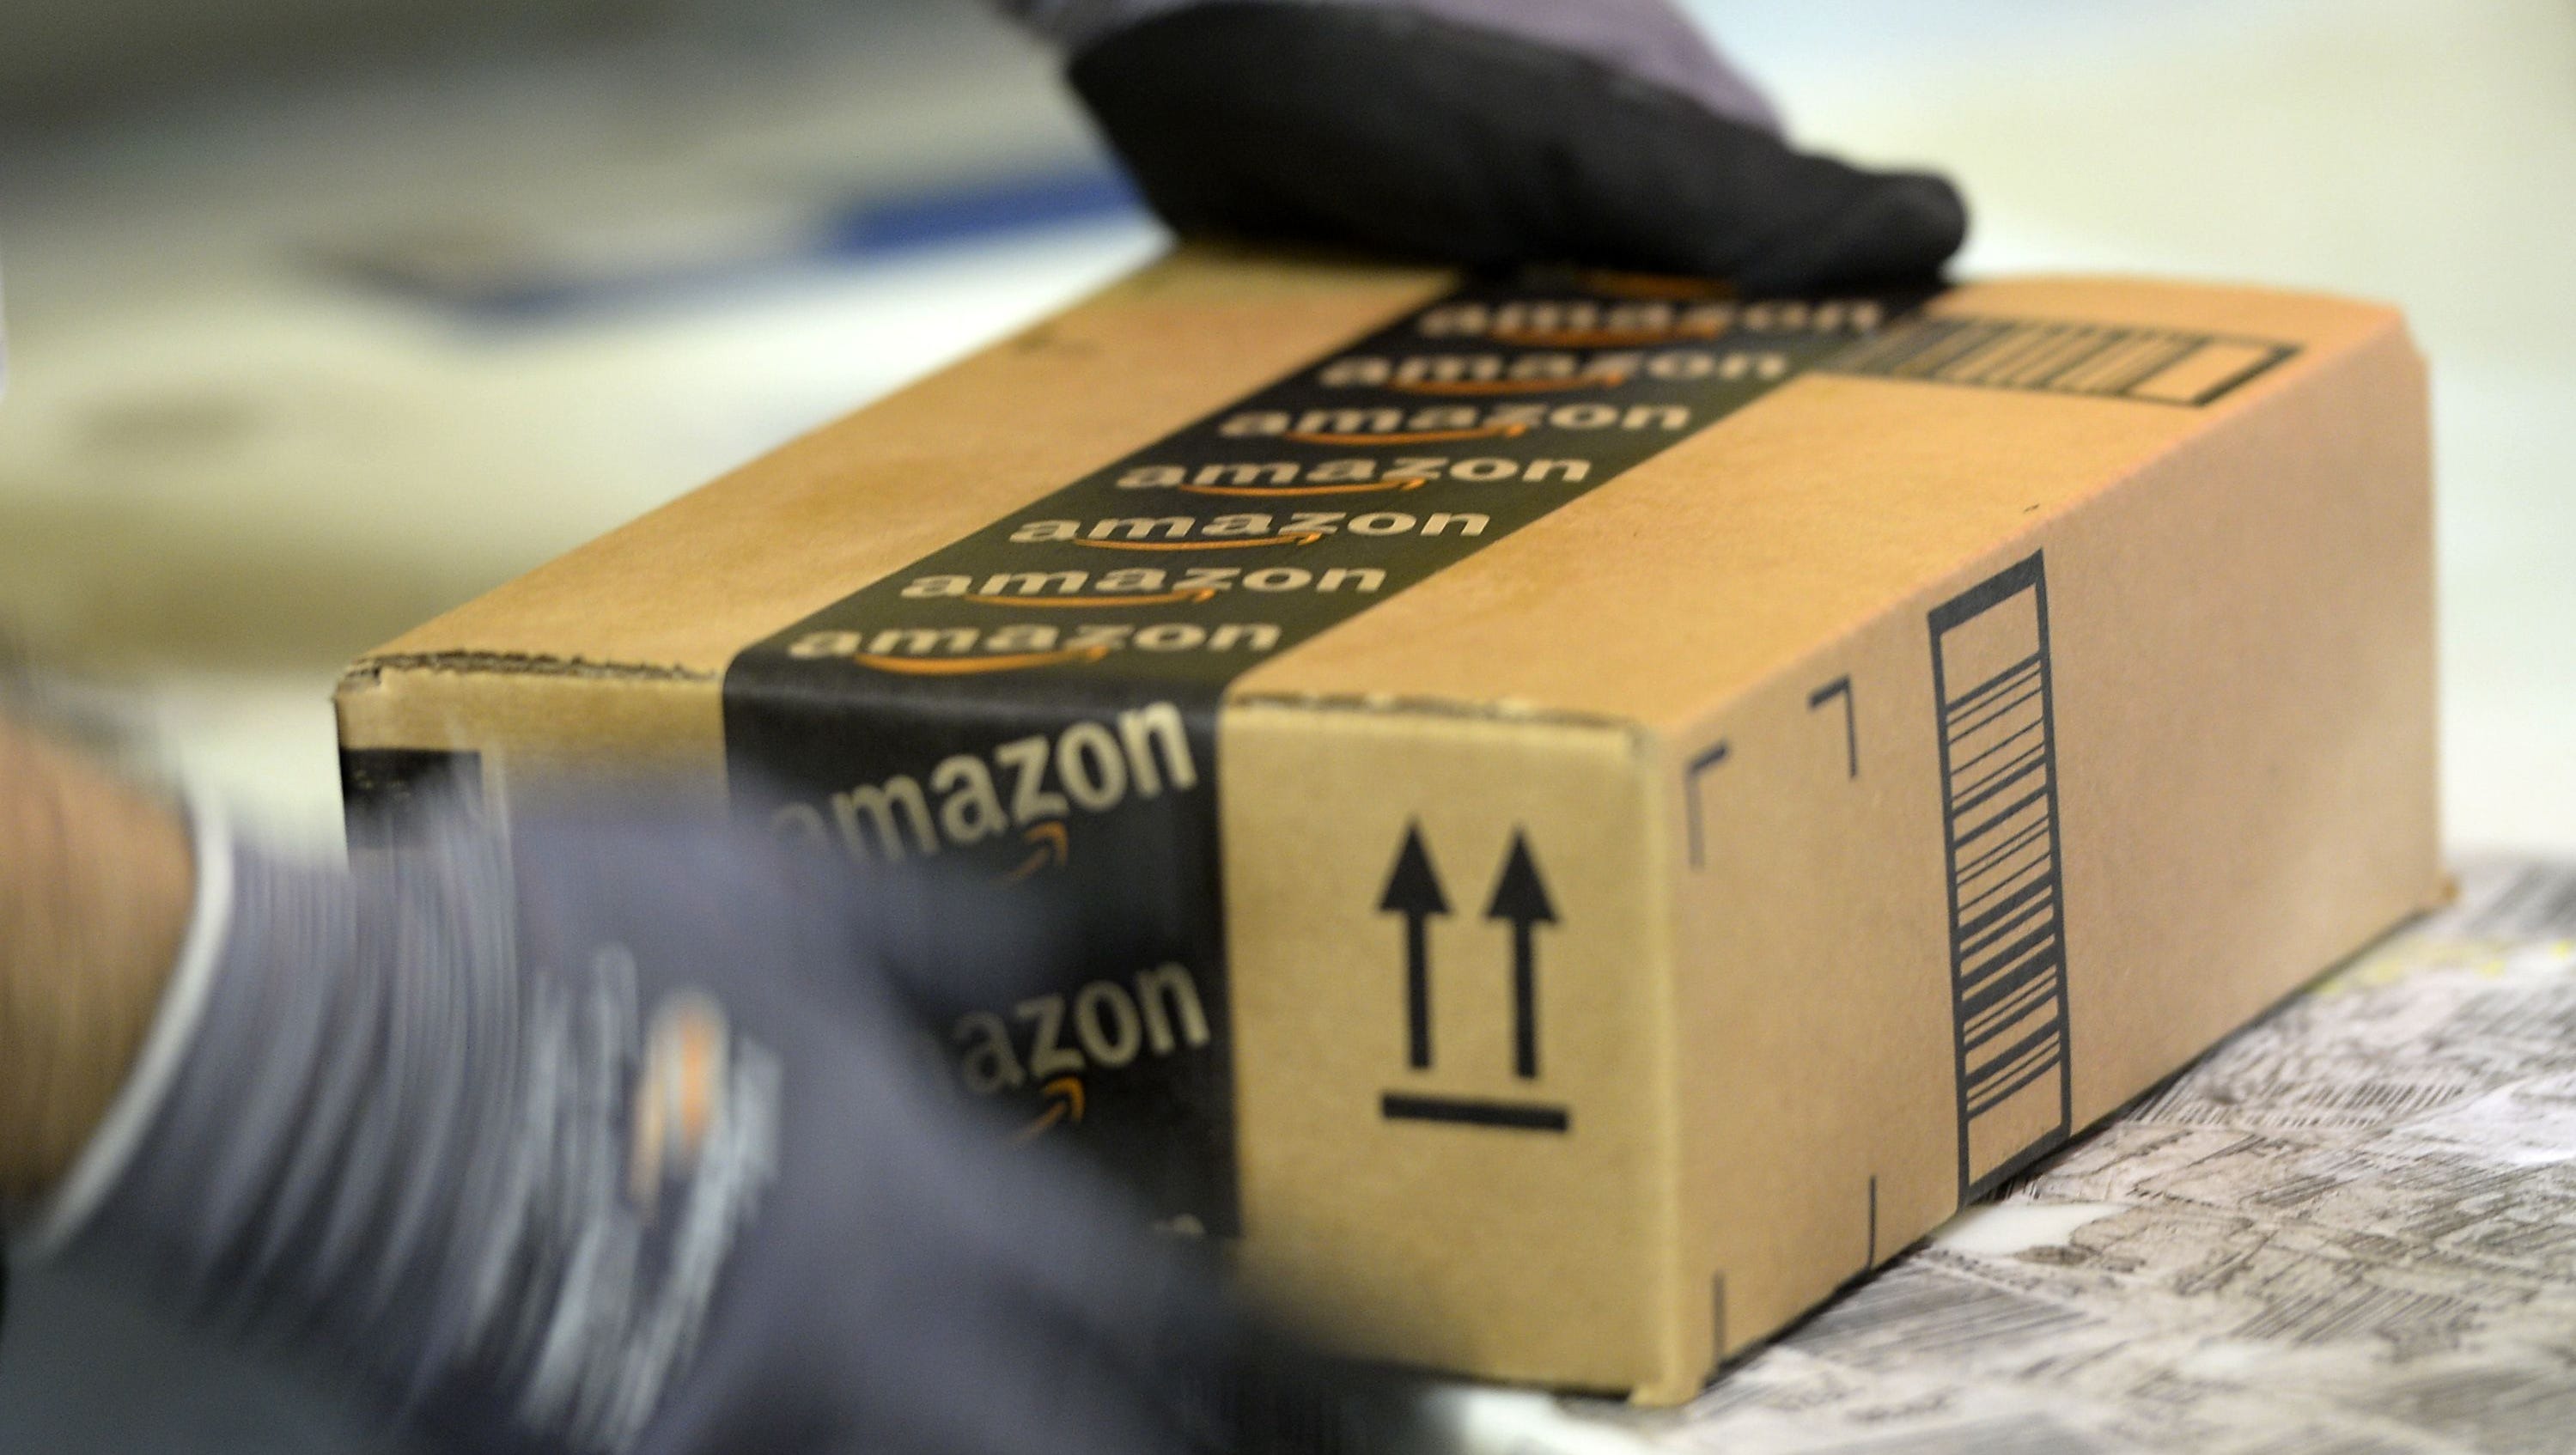 Fill boxes with items for Goodwill; Amazon will pay shipping